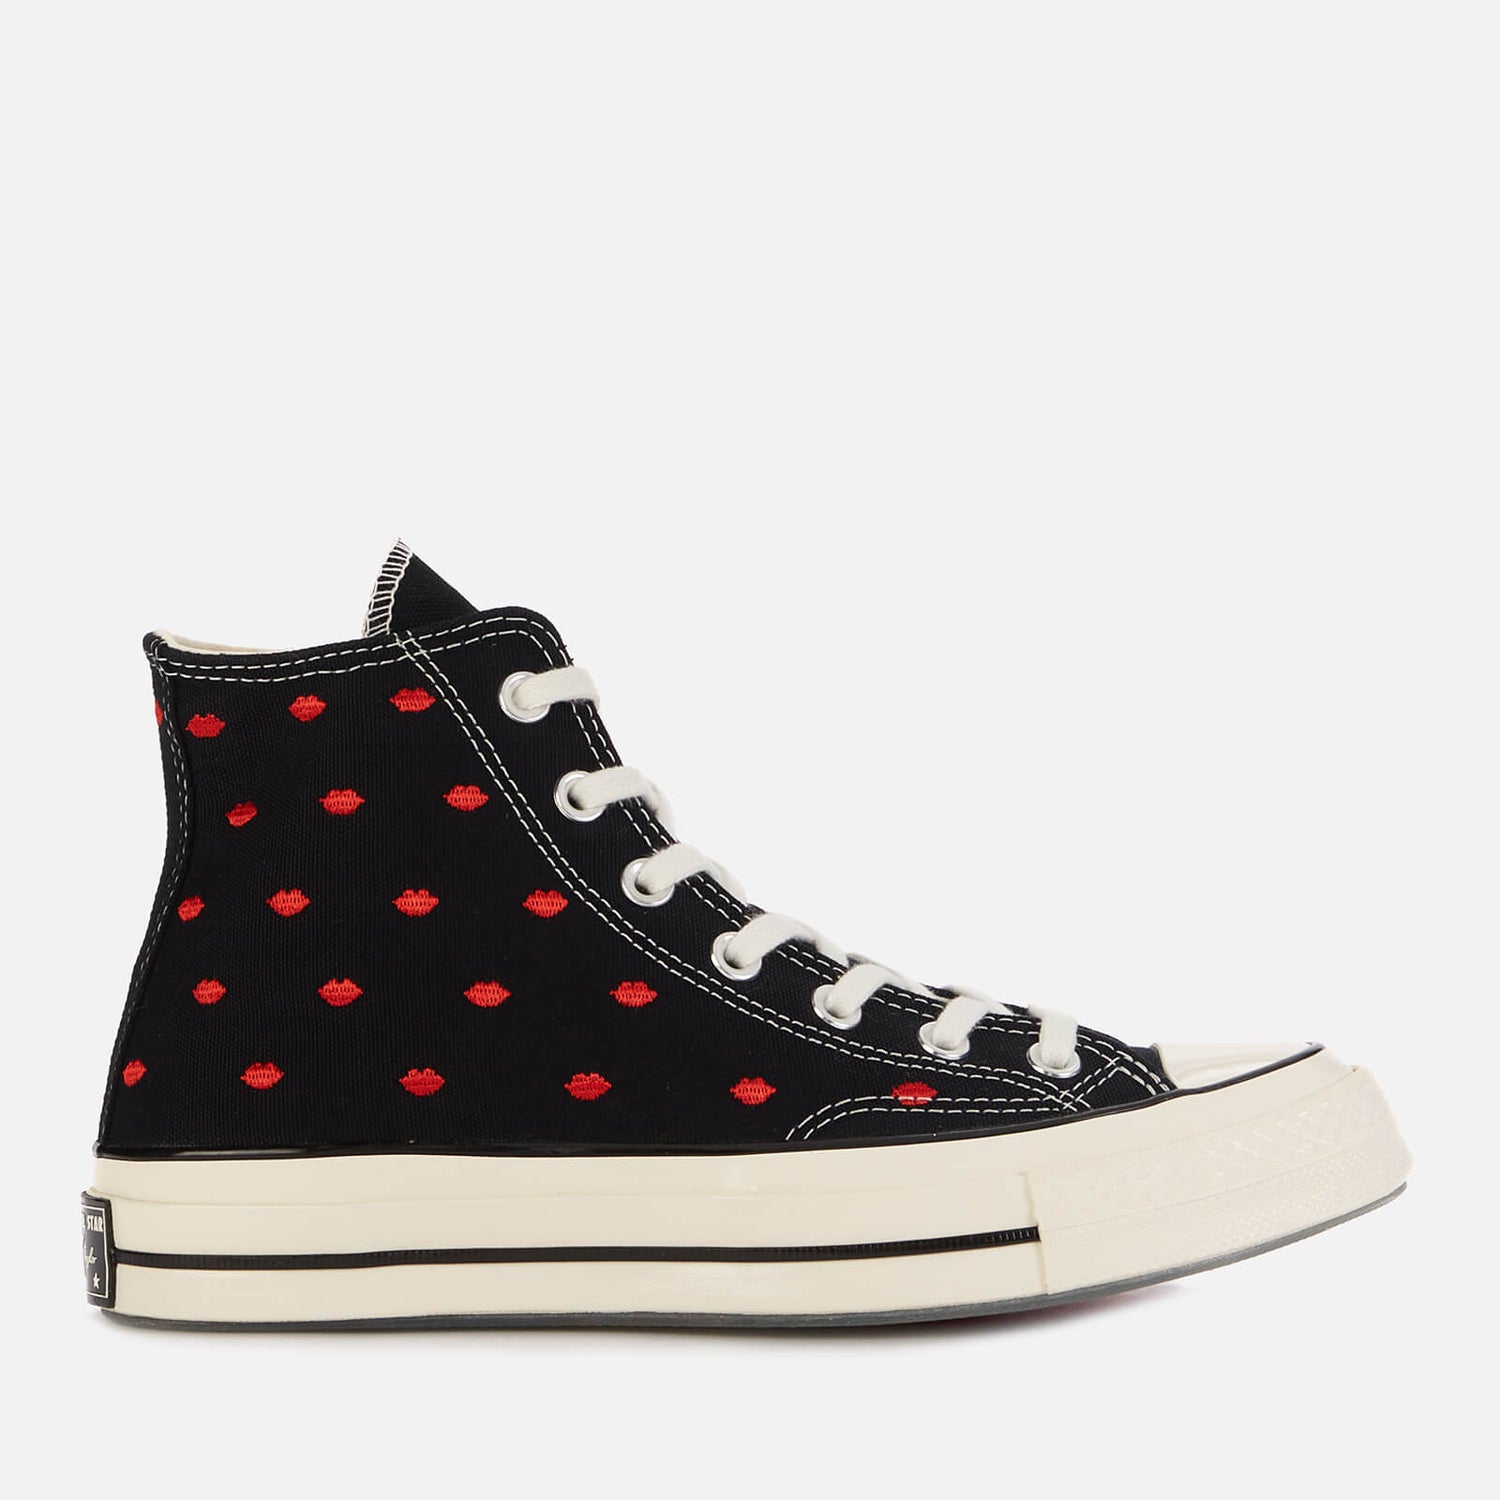 Converse Women's Chuck 70 Crafted With Love Hi-Top Trainers - Black/University Red/Egret - UK 3